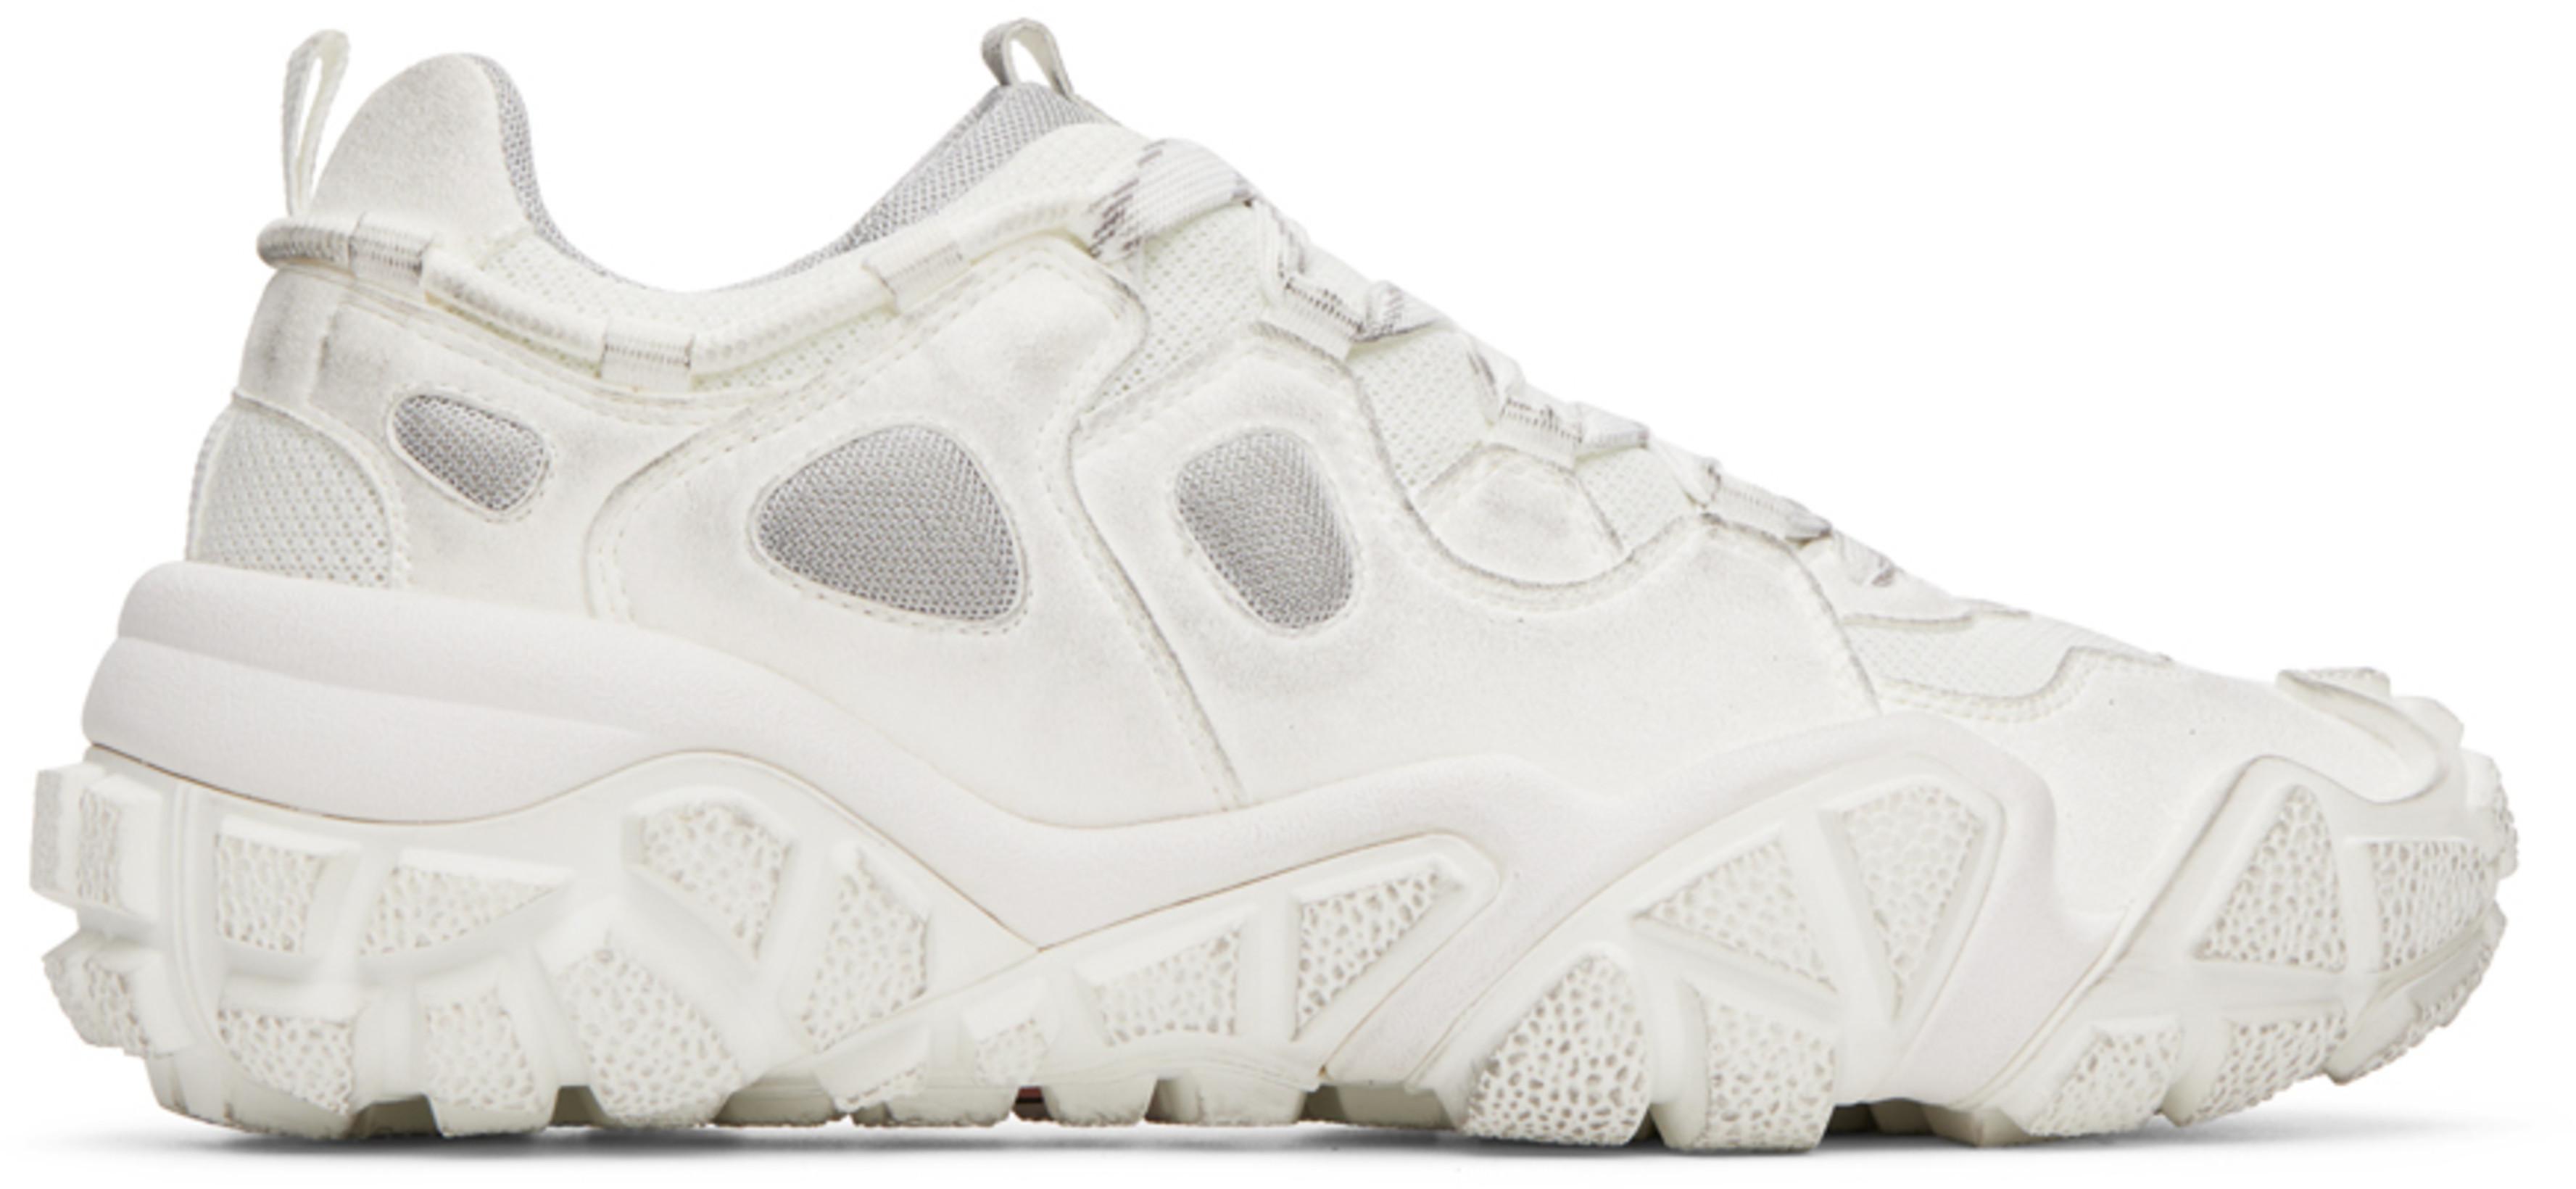 White Tumbled Sneakers by ACNE STUDIOS